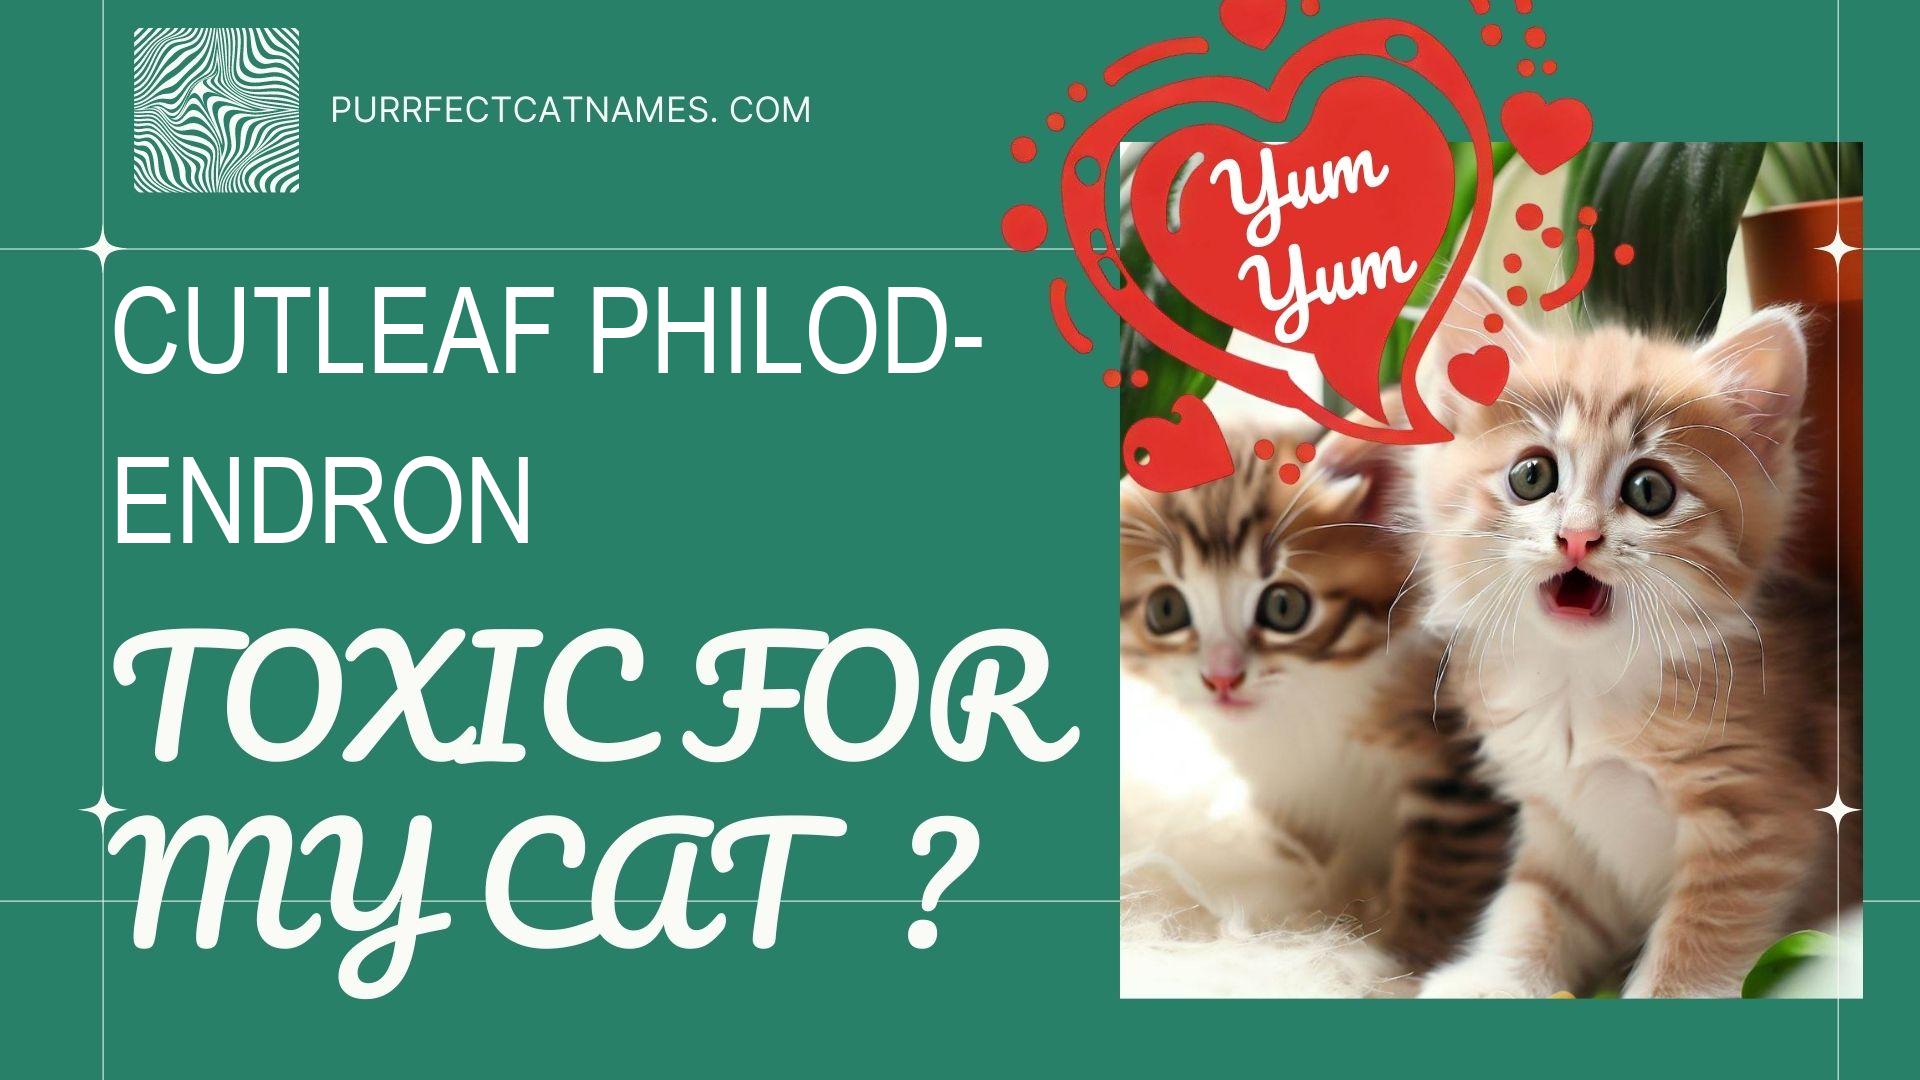 IsCutleaf Philodendron plant toxic for your cat